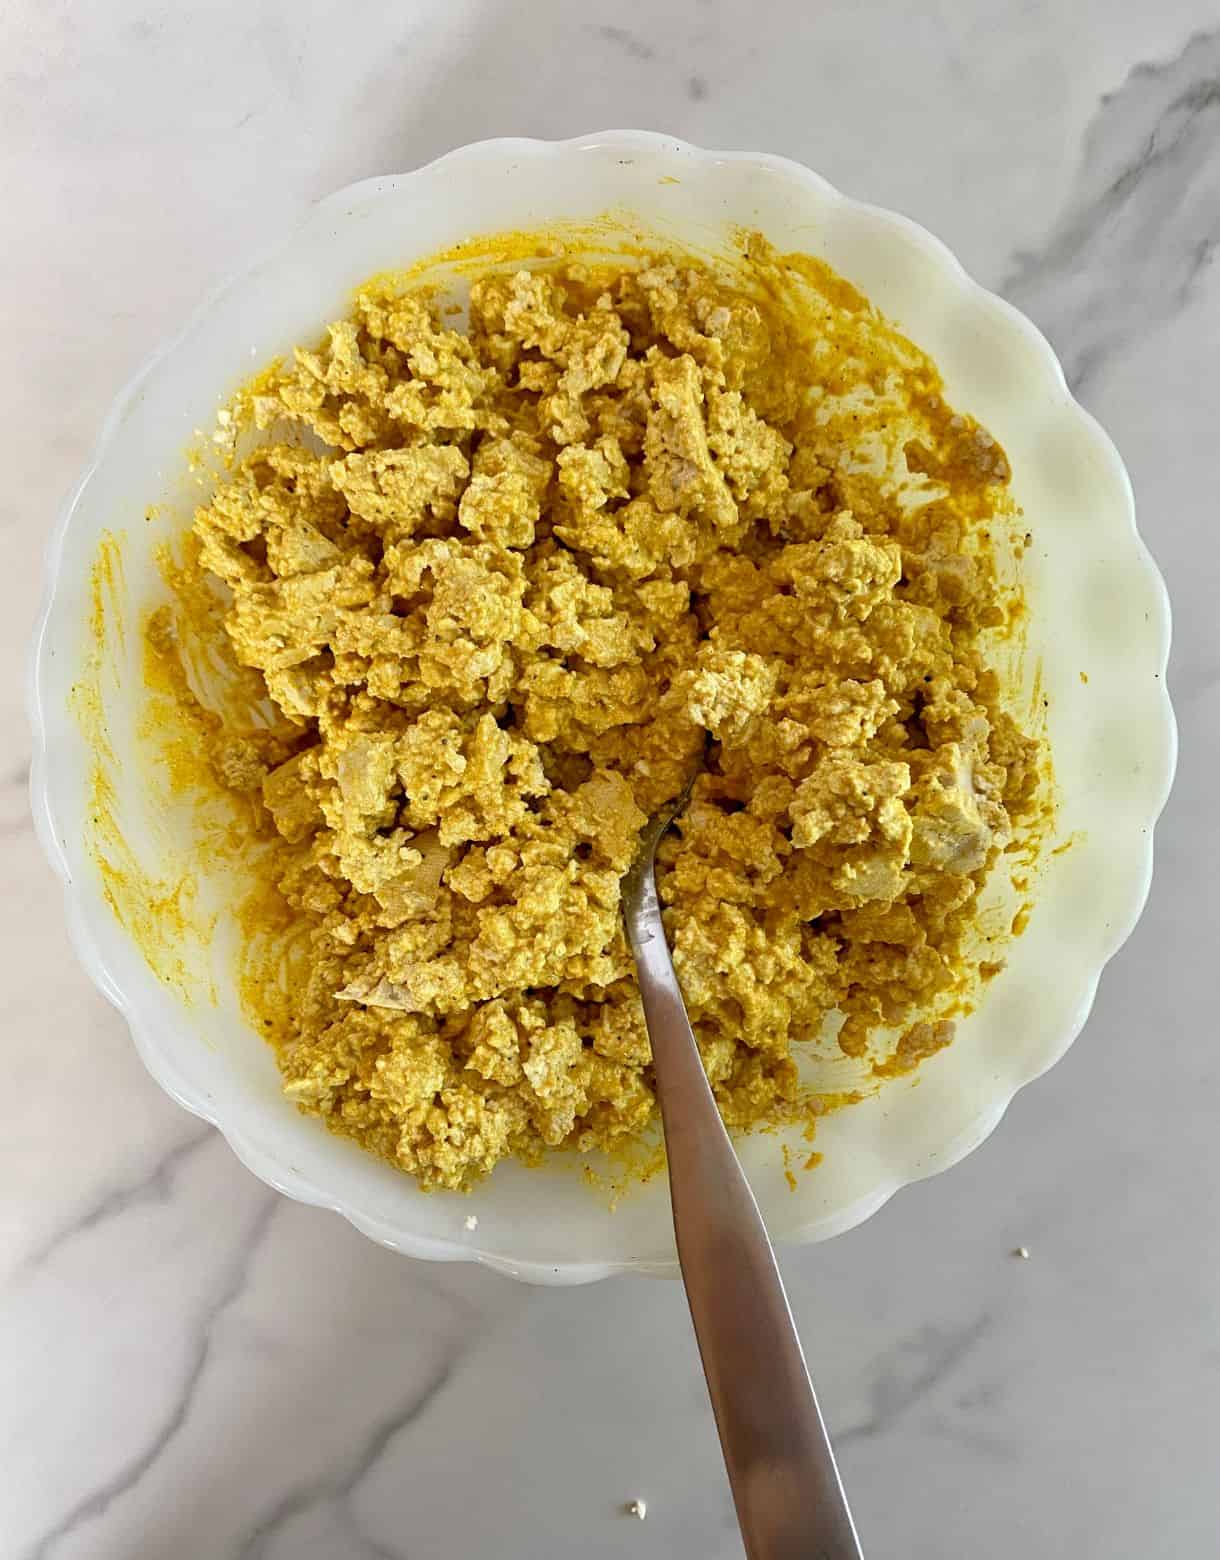 A bowl of crumbled tofu mixed with curry dressing.